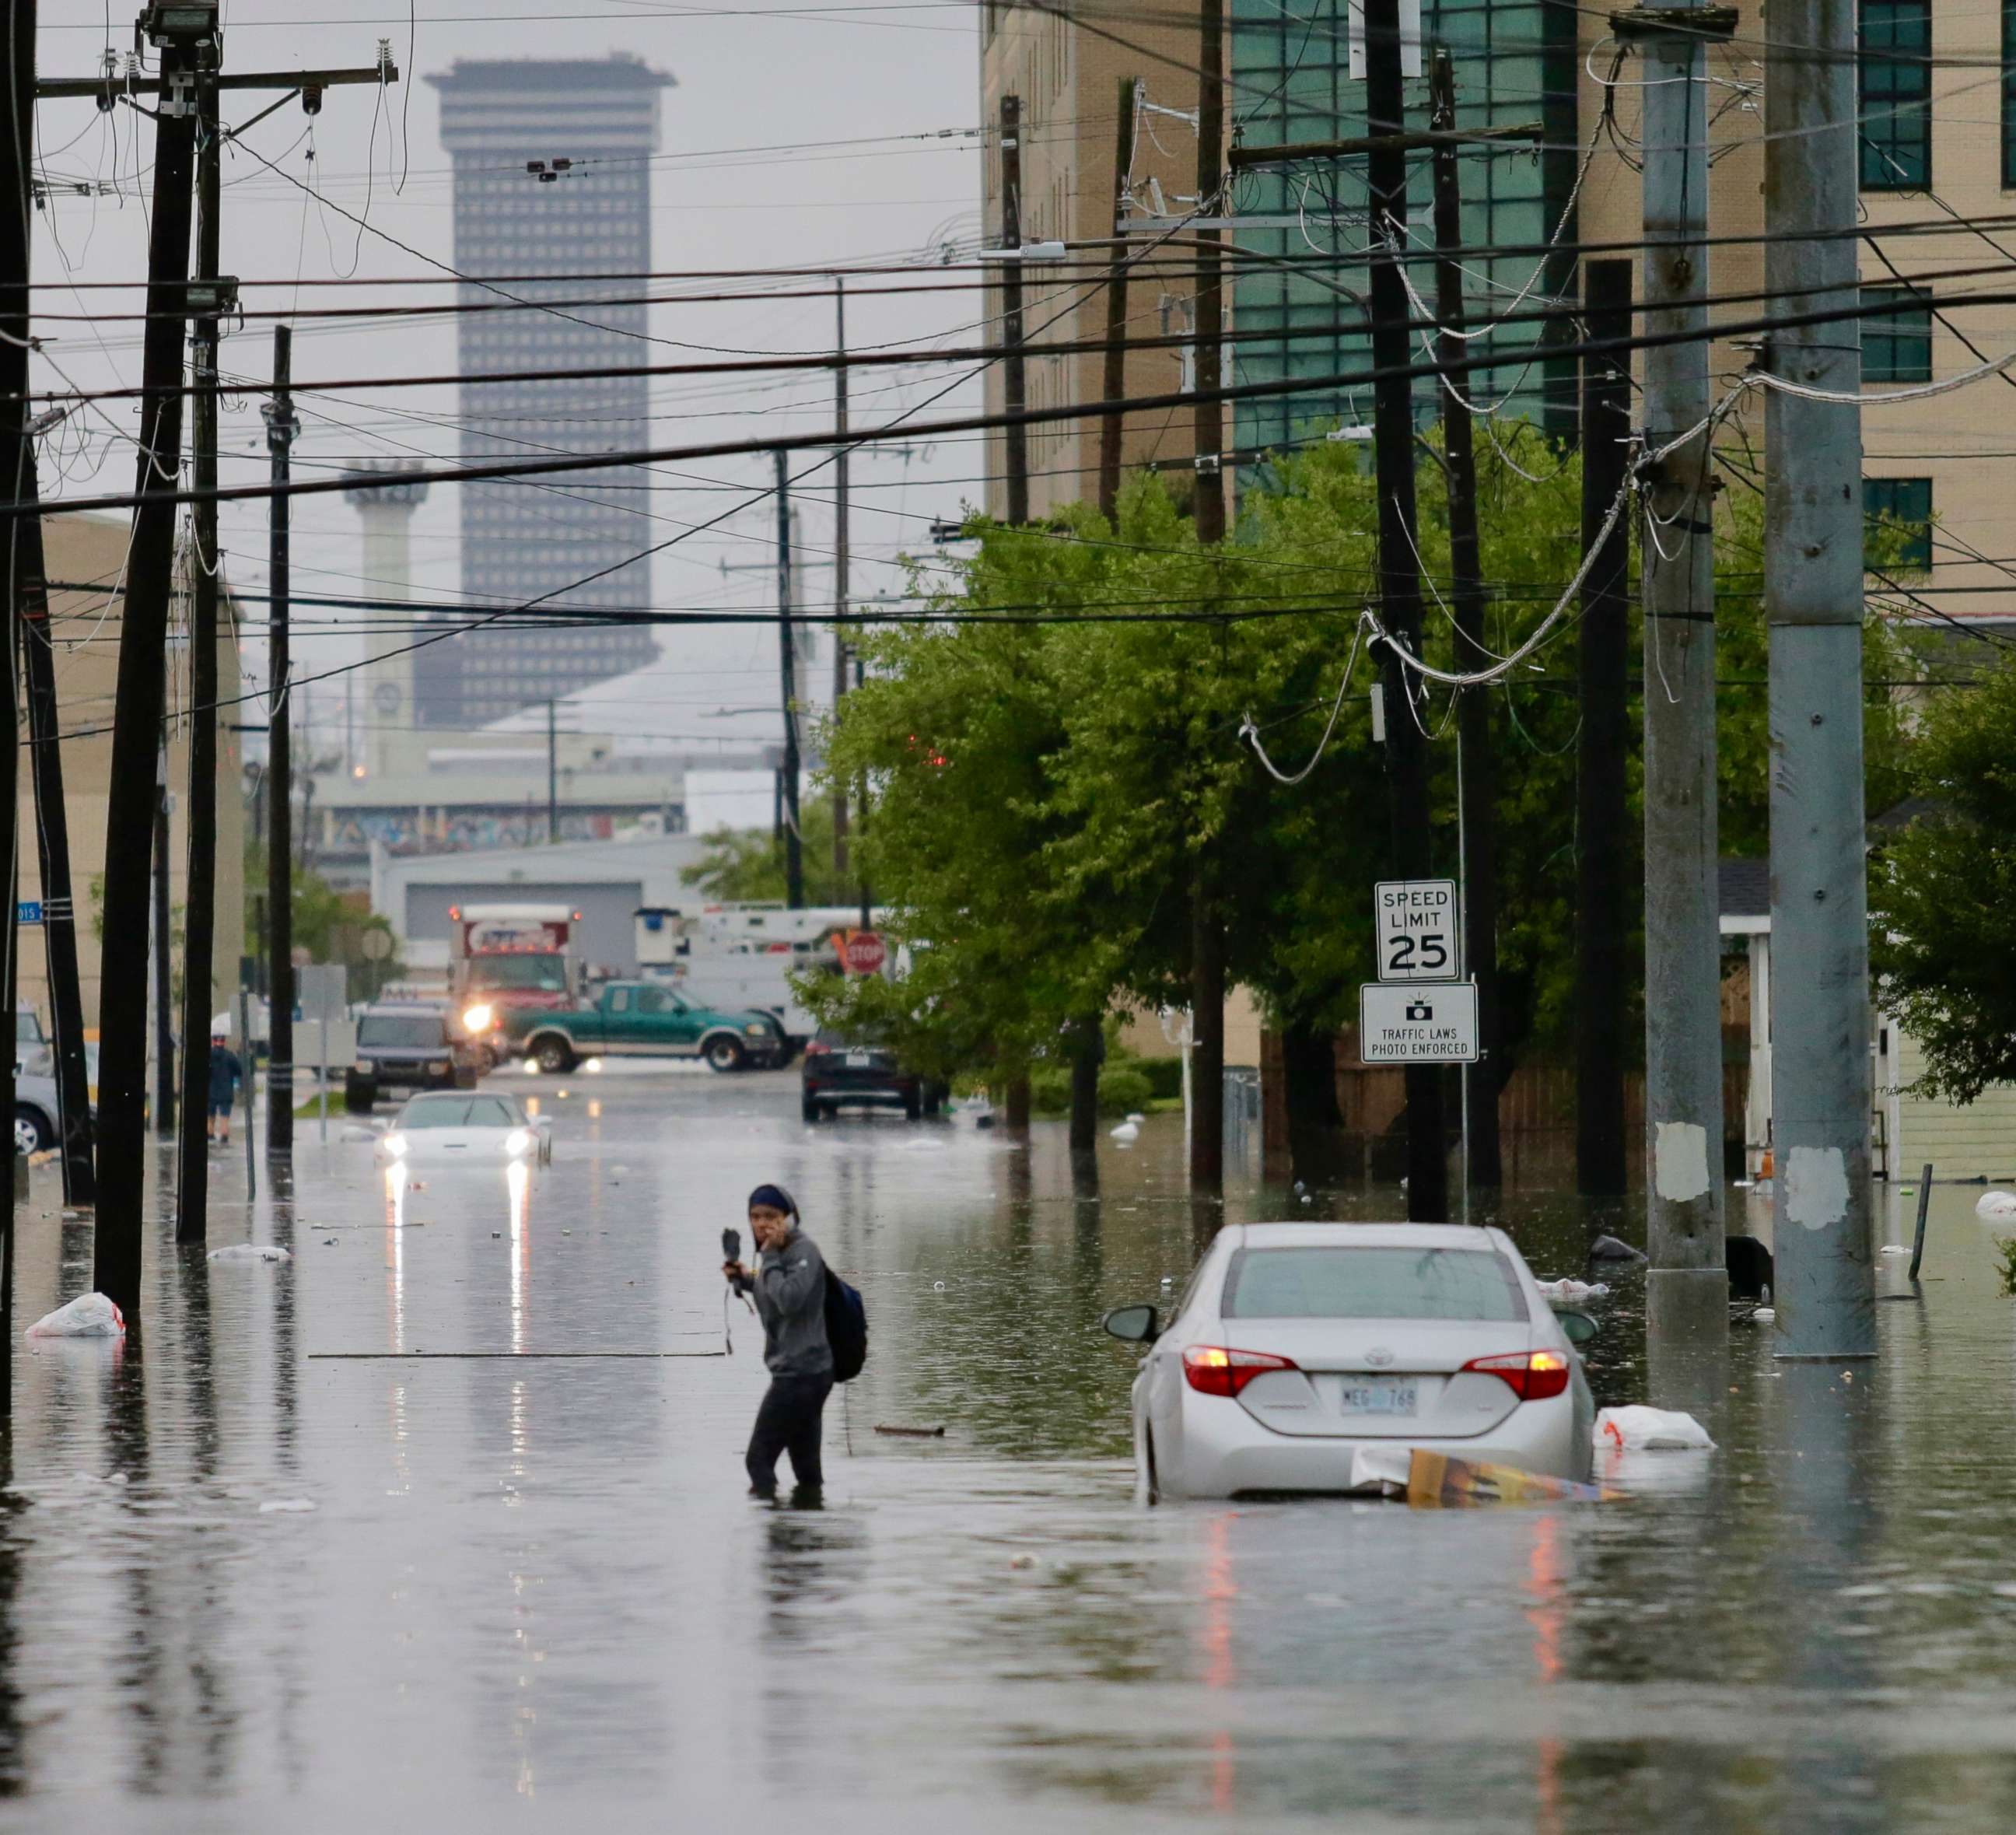 PHOTO: A person crosses a flooded road as heavy rain falls, July 10, 2019, in New Orleans.